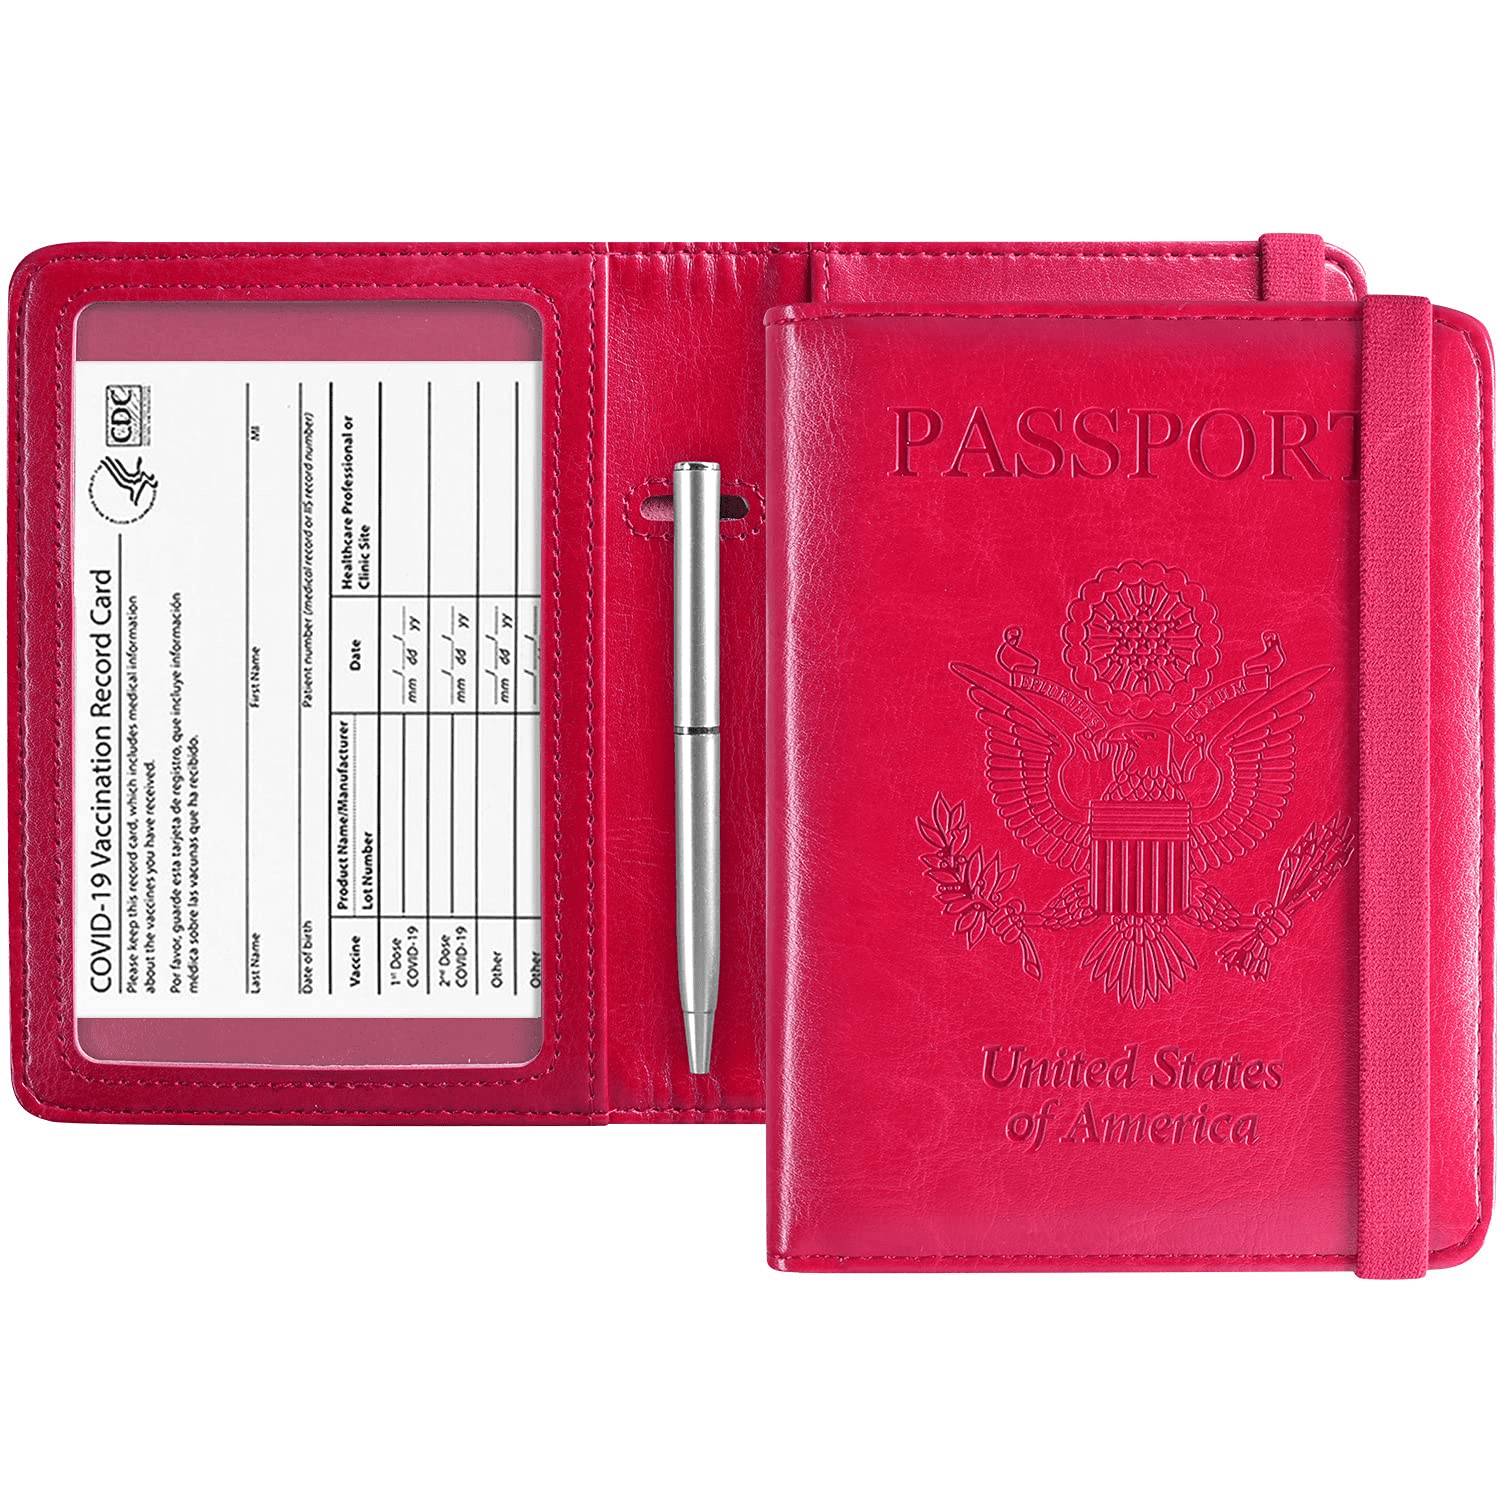 Passport Holder Cover With Vaccine Record Card Protector case. 